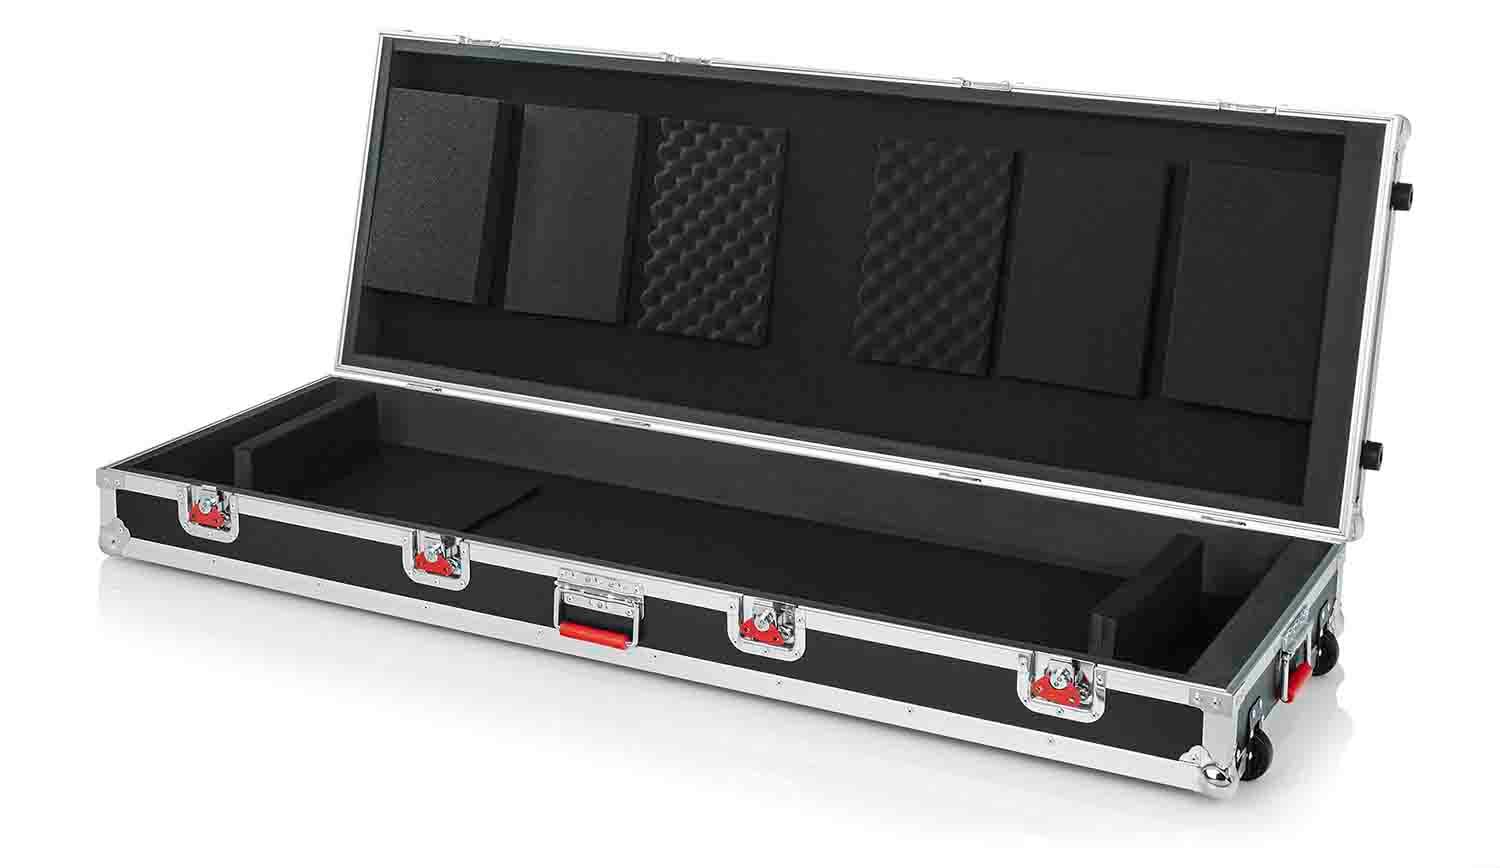 Gator Cases G-TOUR 88V2 Road Case for 88 Note Keyboards with Wheels - Hollywood DJ